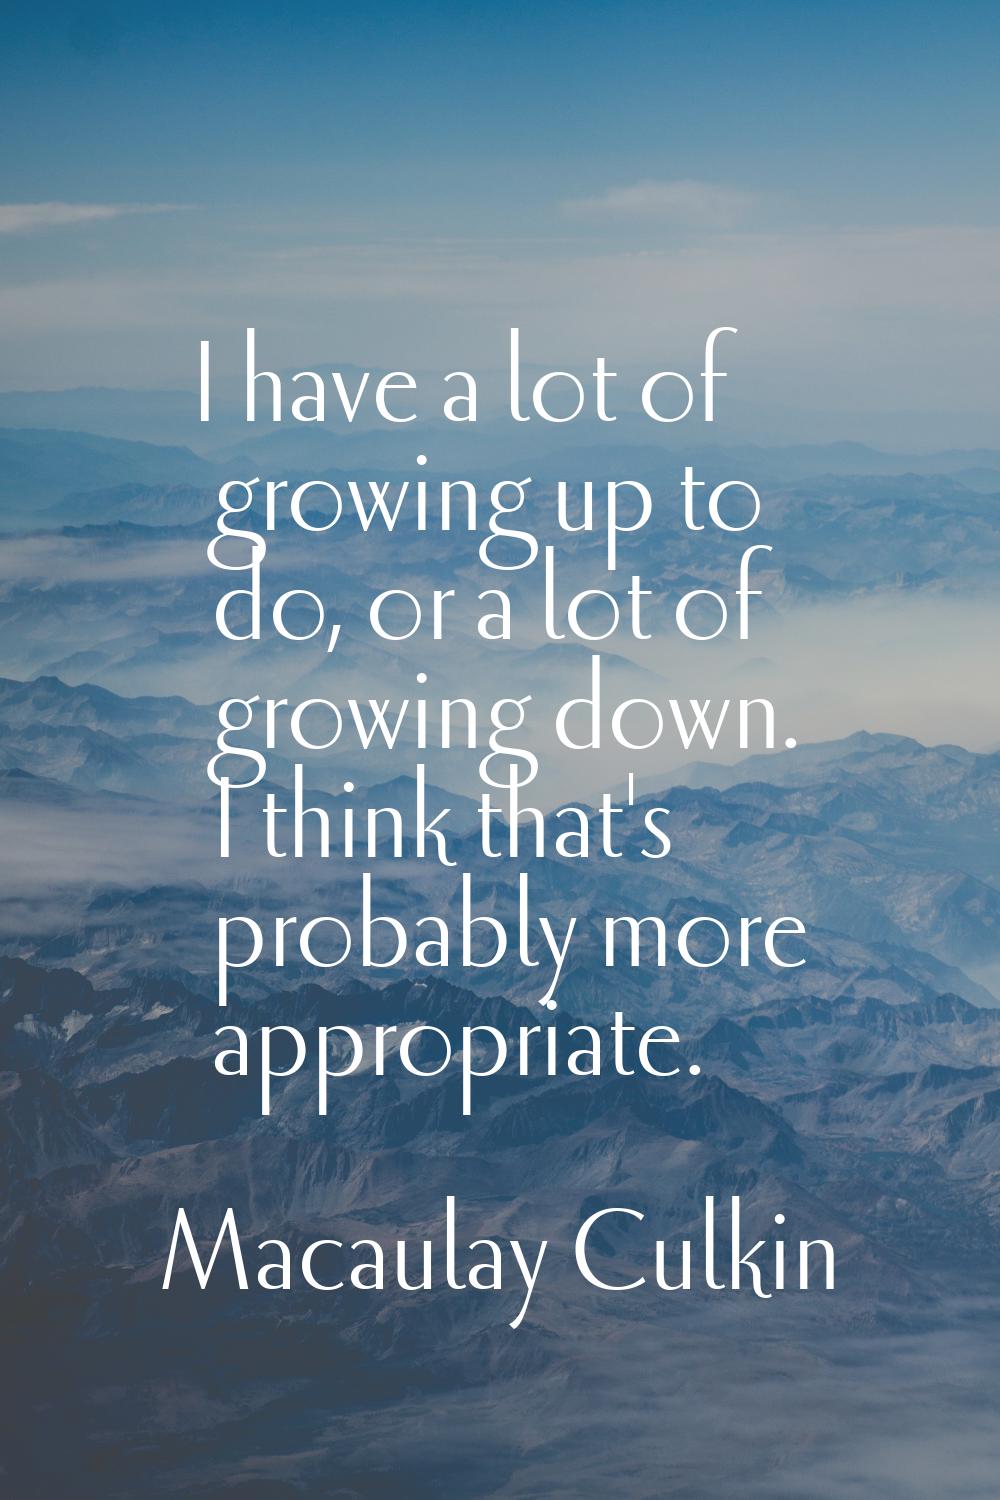 I have a lot of growing up to do, or a lot of growing down. I think that's probably more appropriat